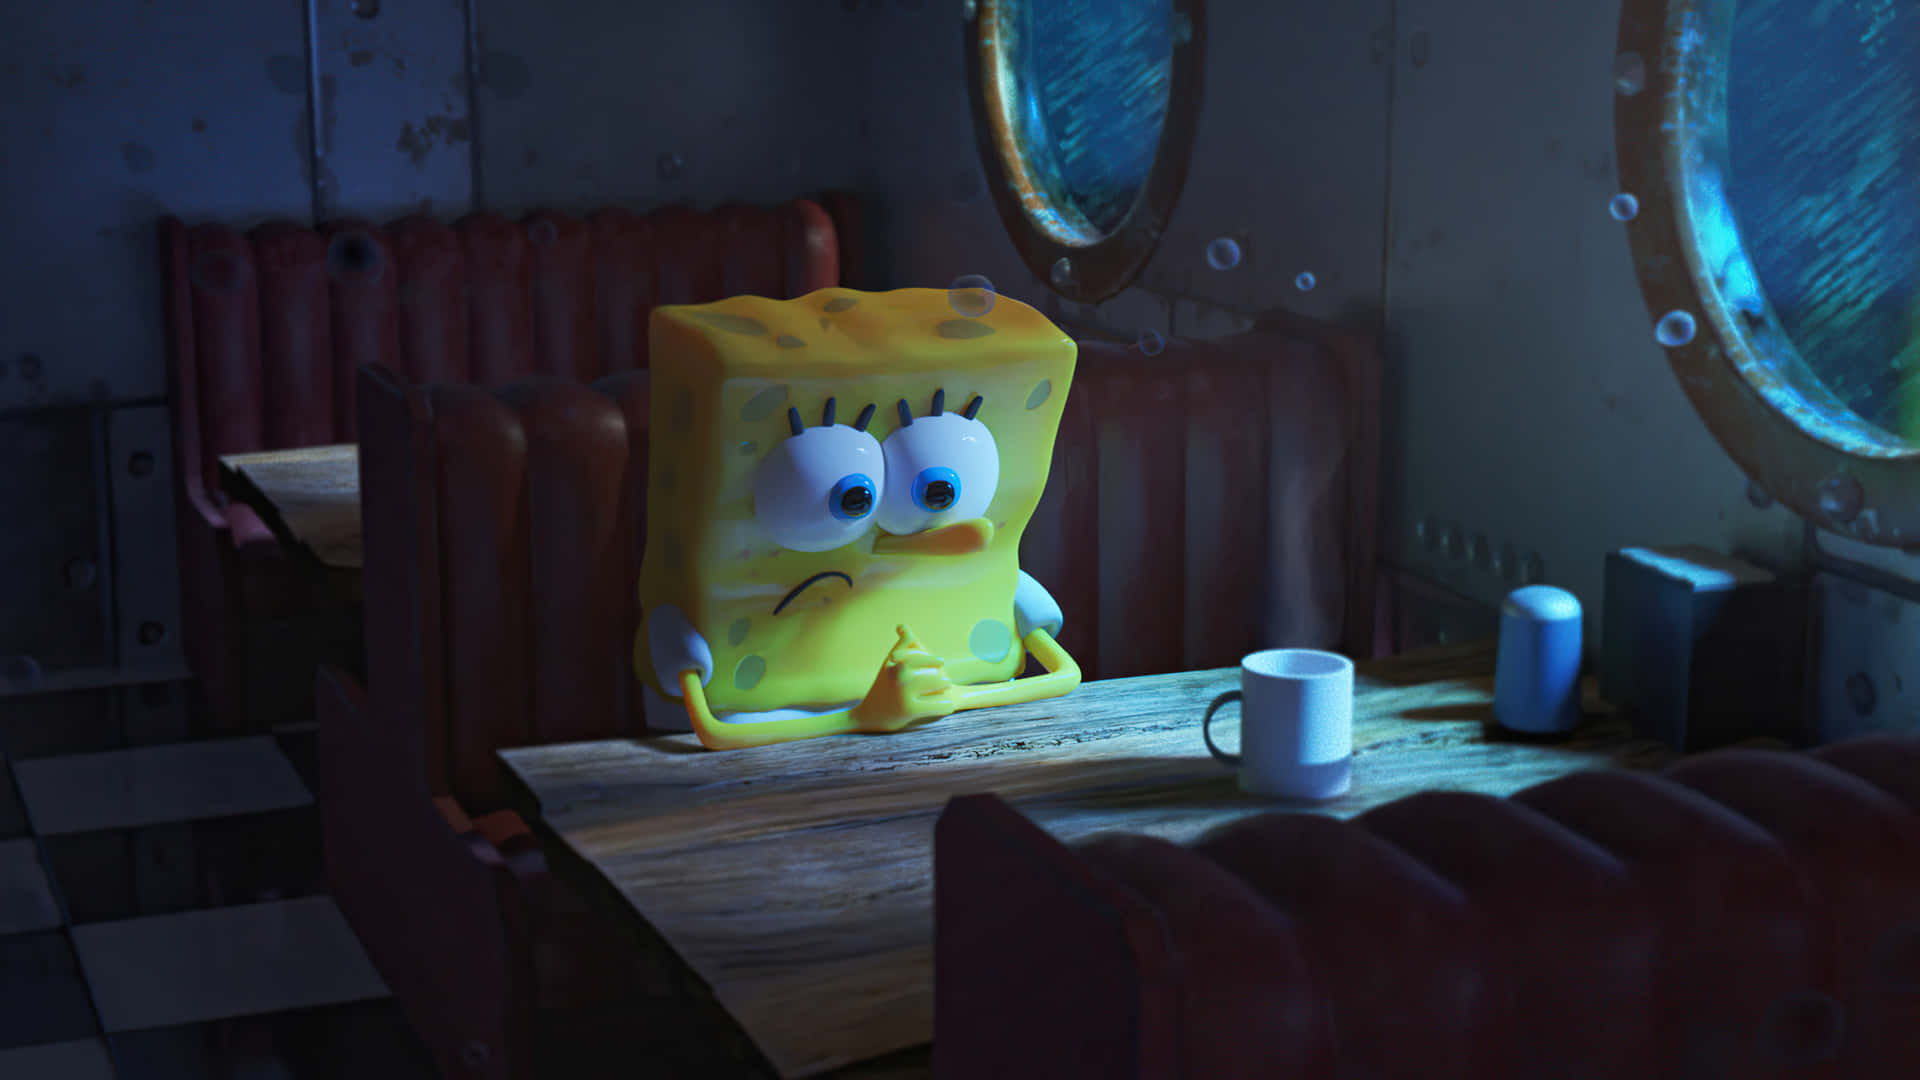 Download Feeling down and out, Sad Spongebob stares forlornly at the  ground. Wallpaper